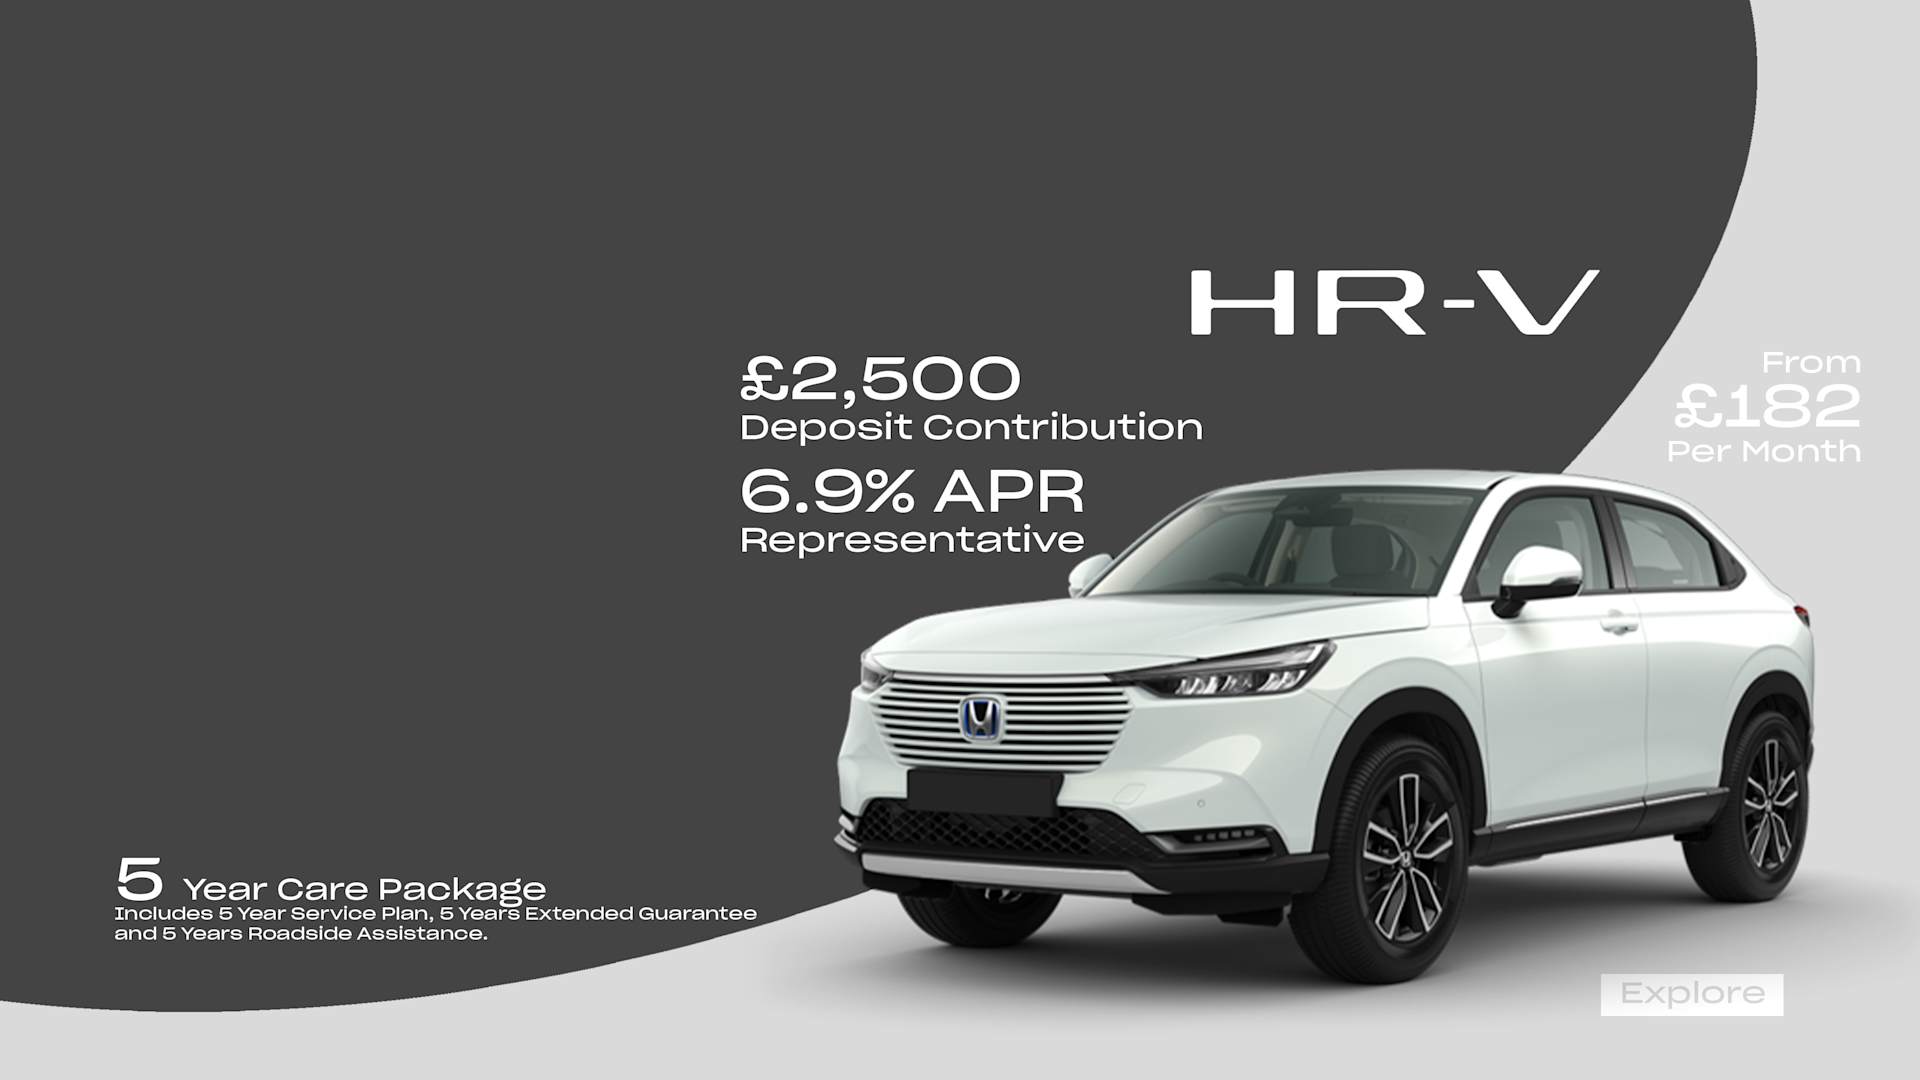 HR-V from £182 per month